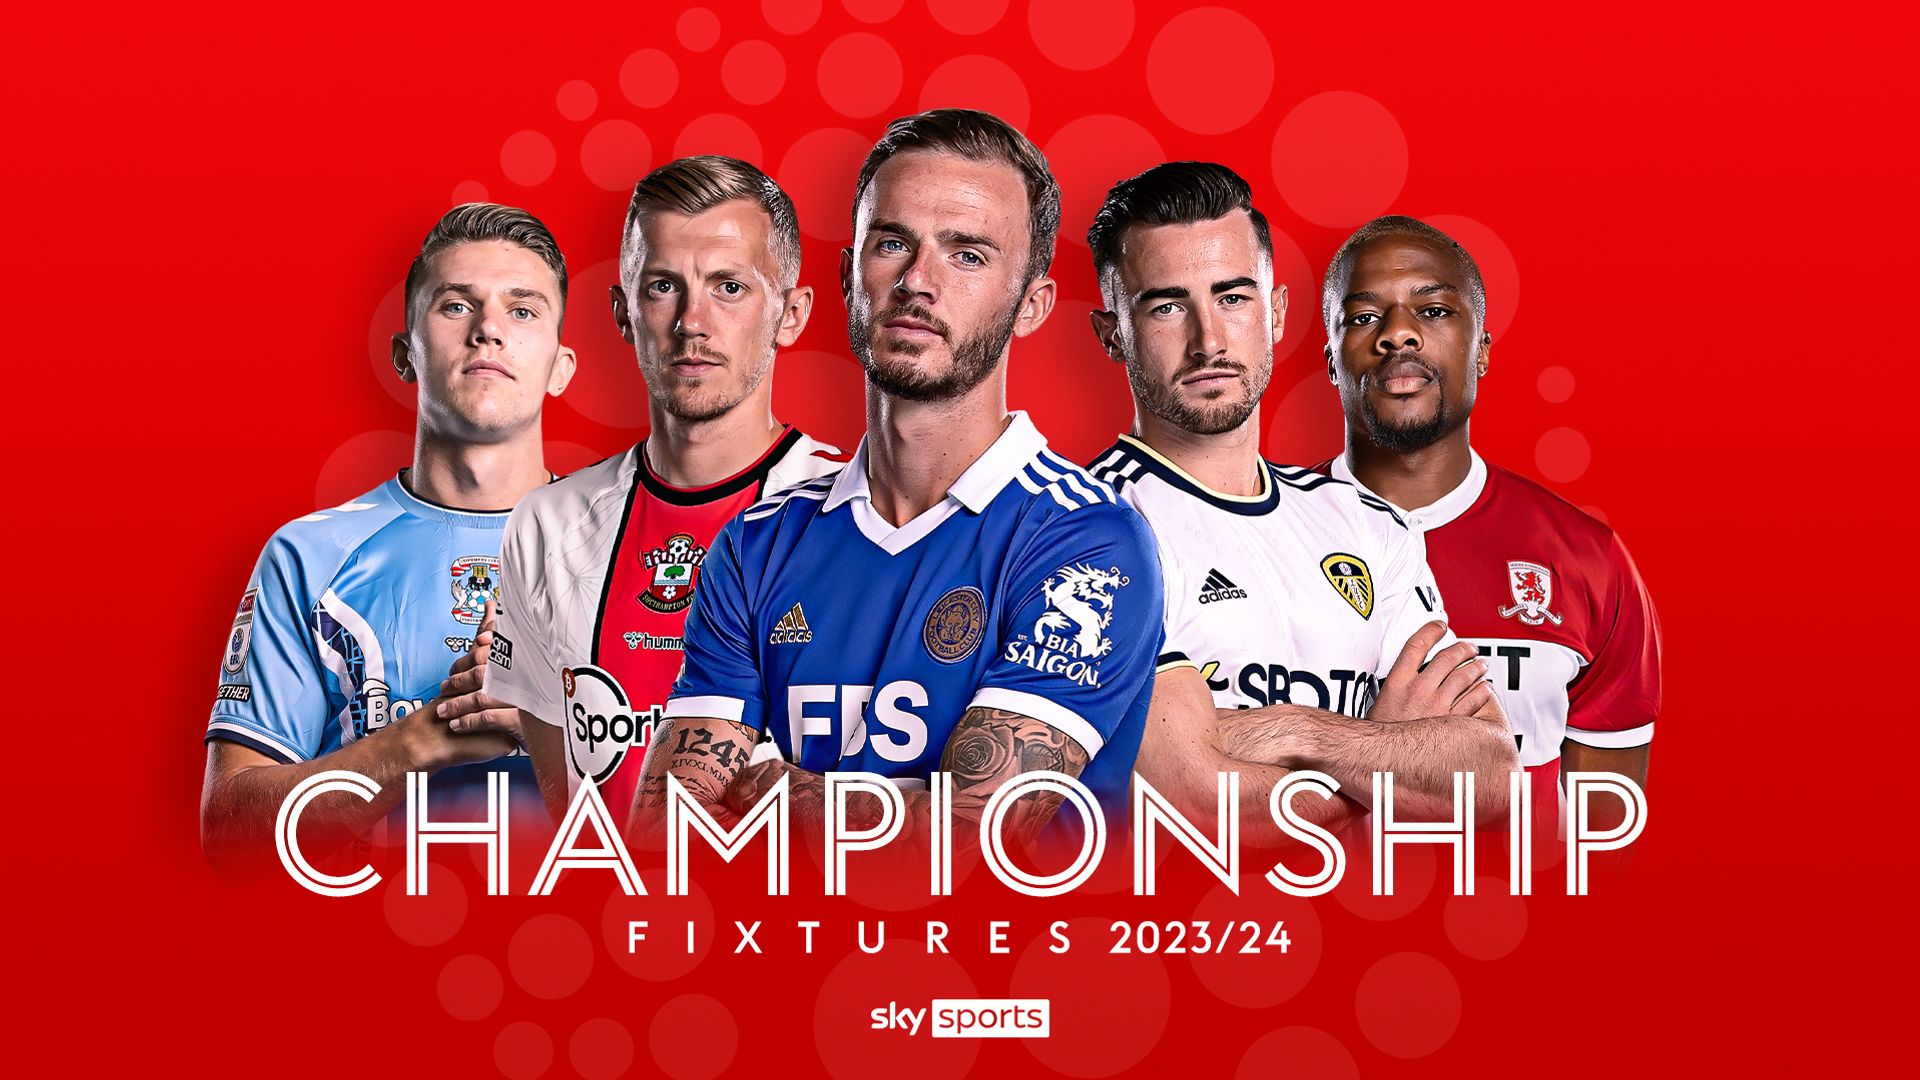 Championship fixtures and schedule 2023/24 Sheffield Wednesday and